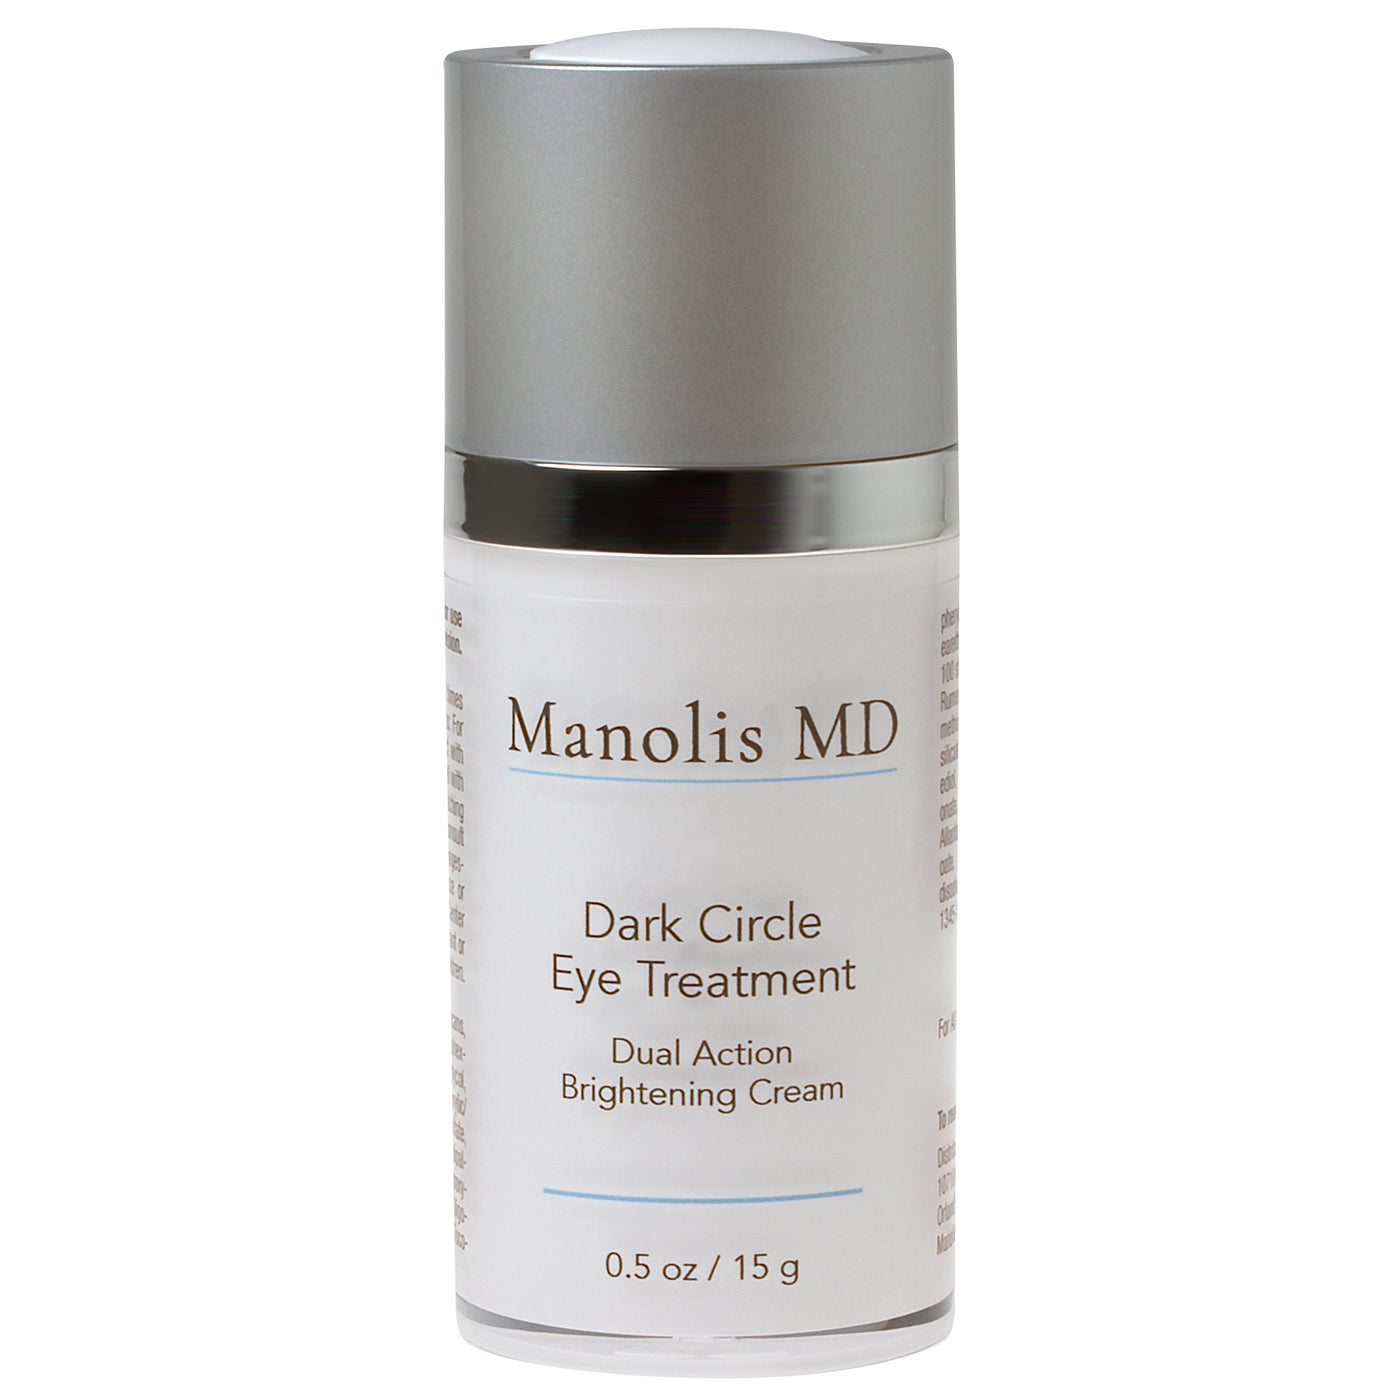 Dark Circle Eye Cream is a dual action brightening cream for the eyes. A dynamic approach to reducing the appearance of dark circles around the eye area using a combination of powerful skin brighteners.